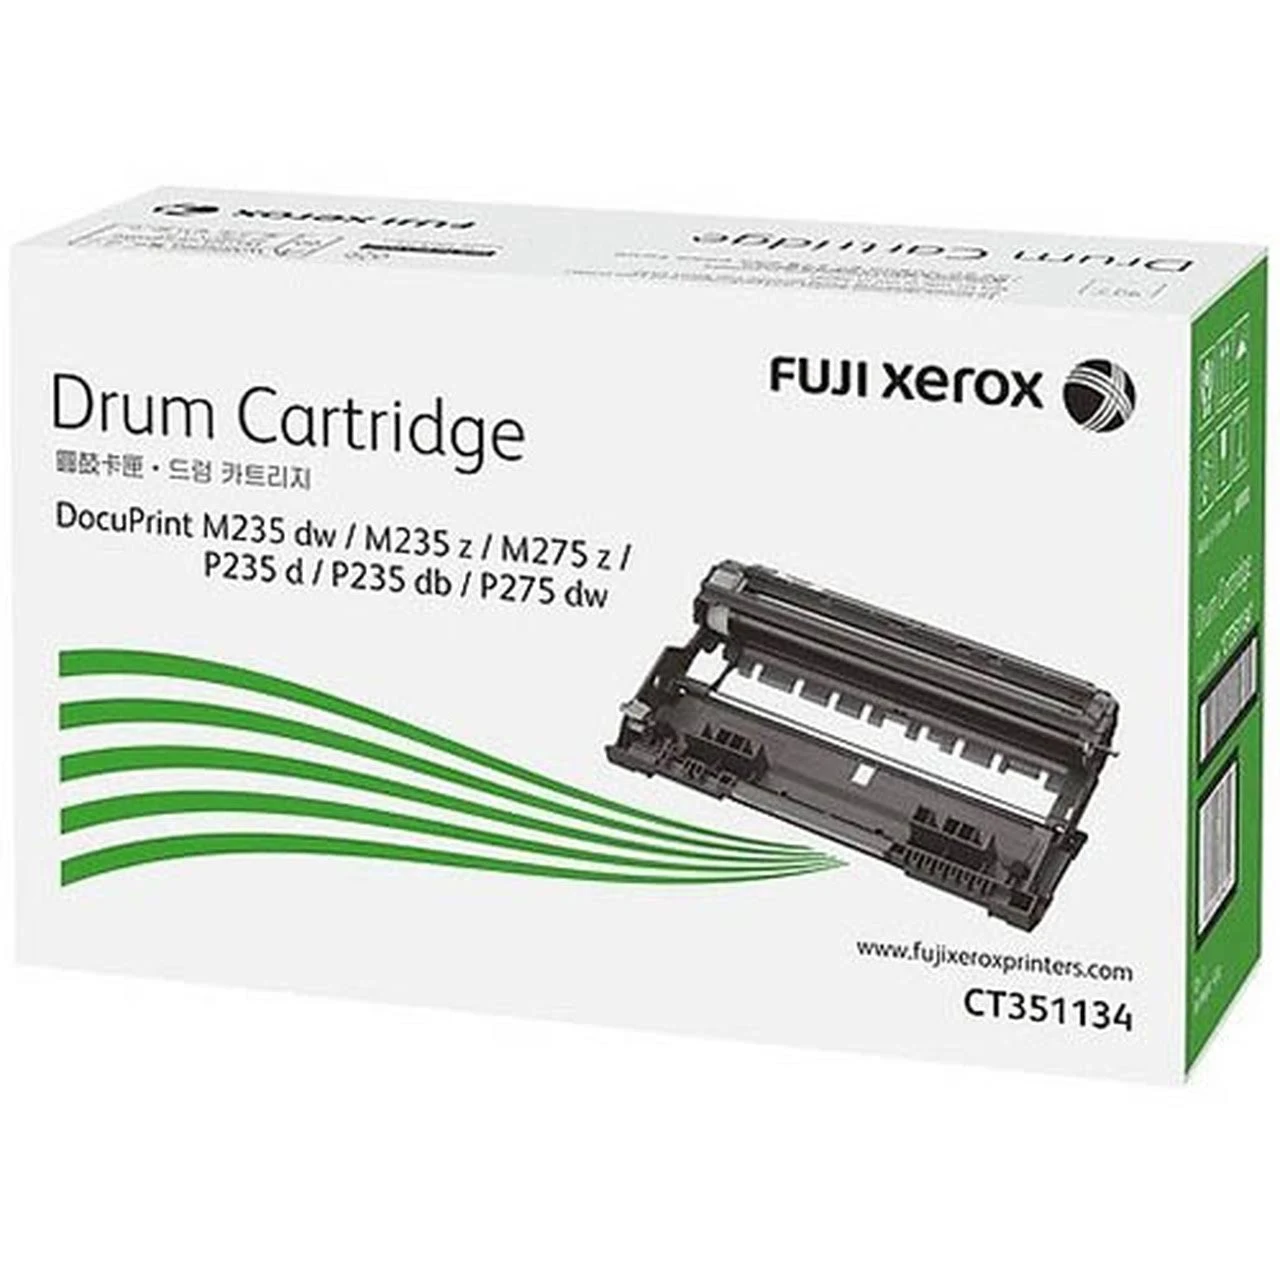 Fuji Xerox CT351134 Drum Unit 12,000 pages for  Printer